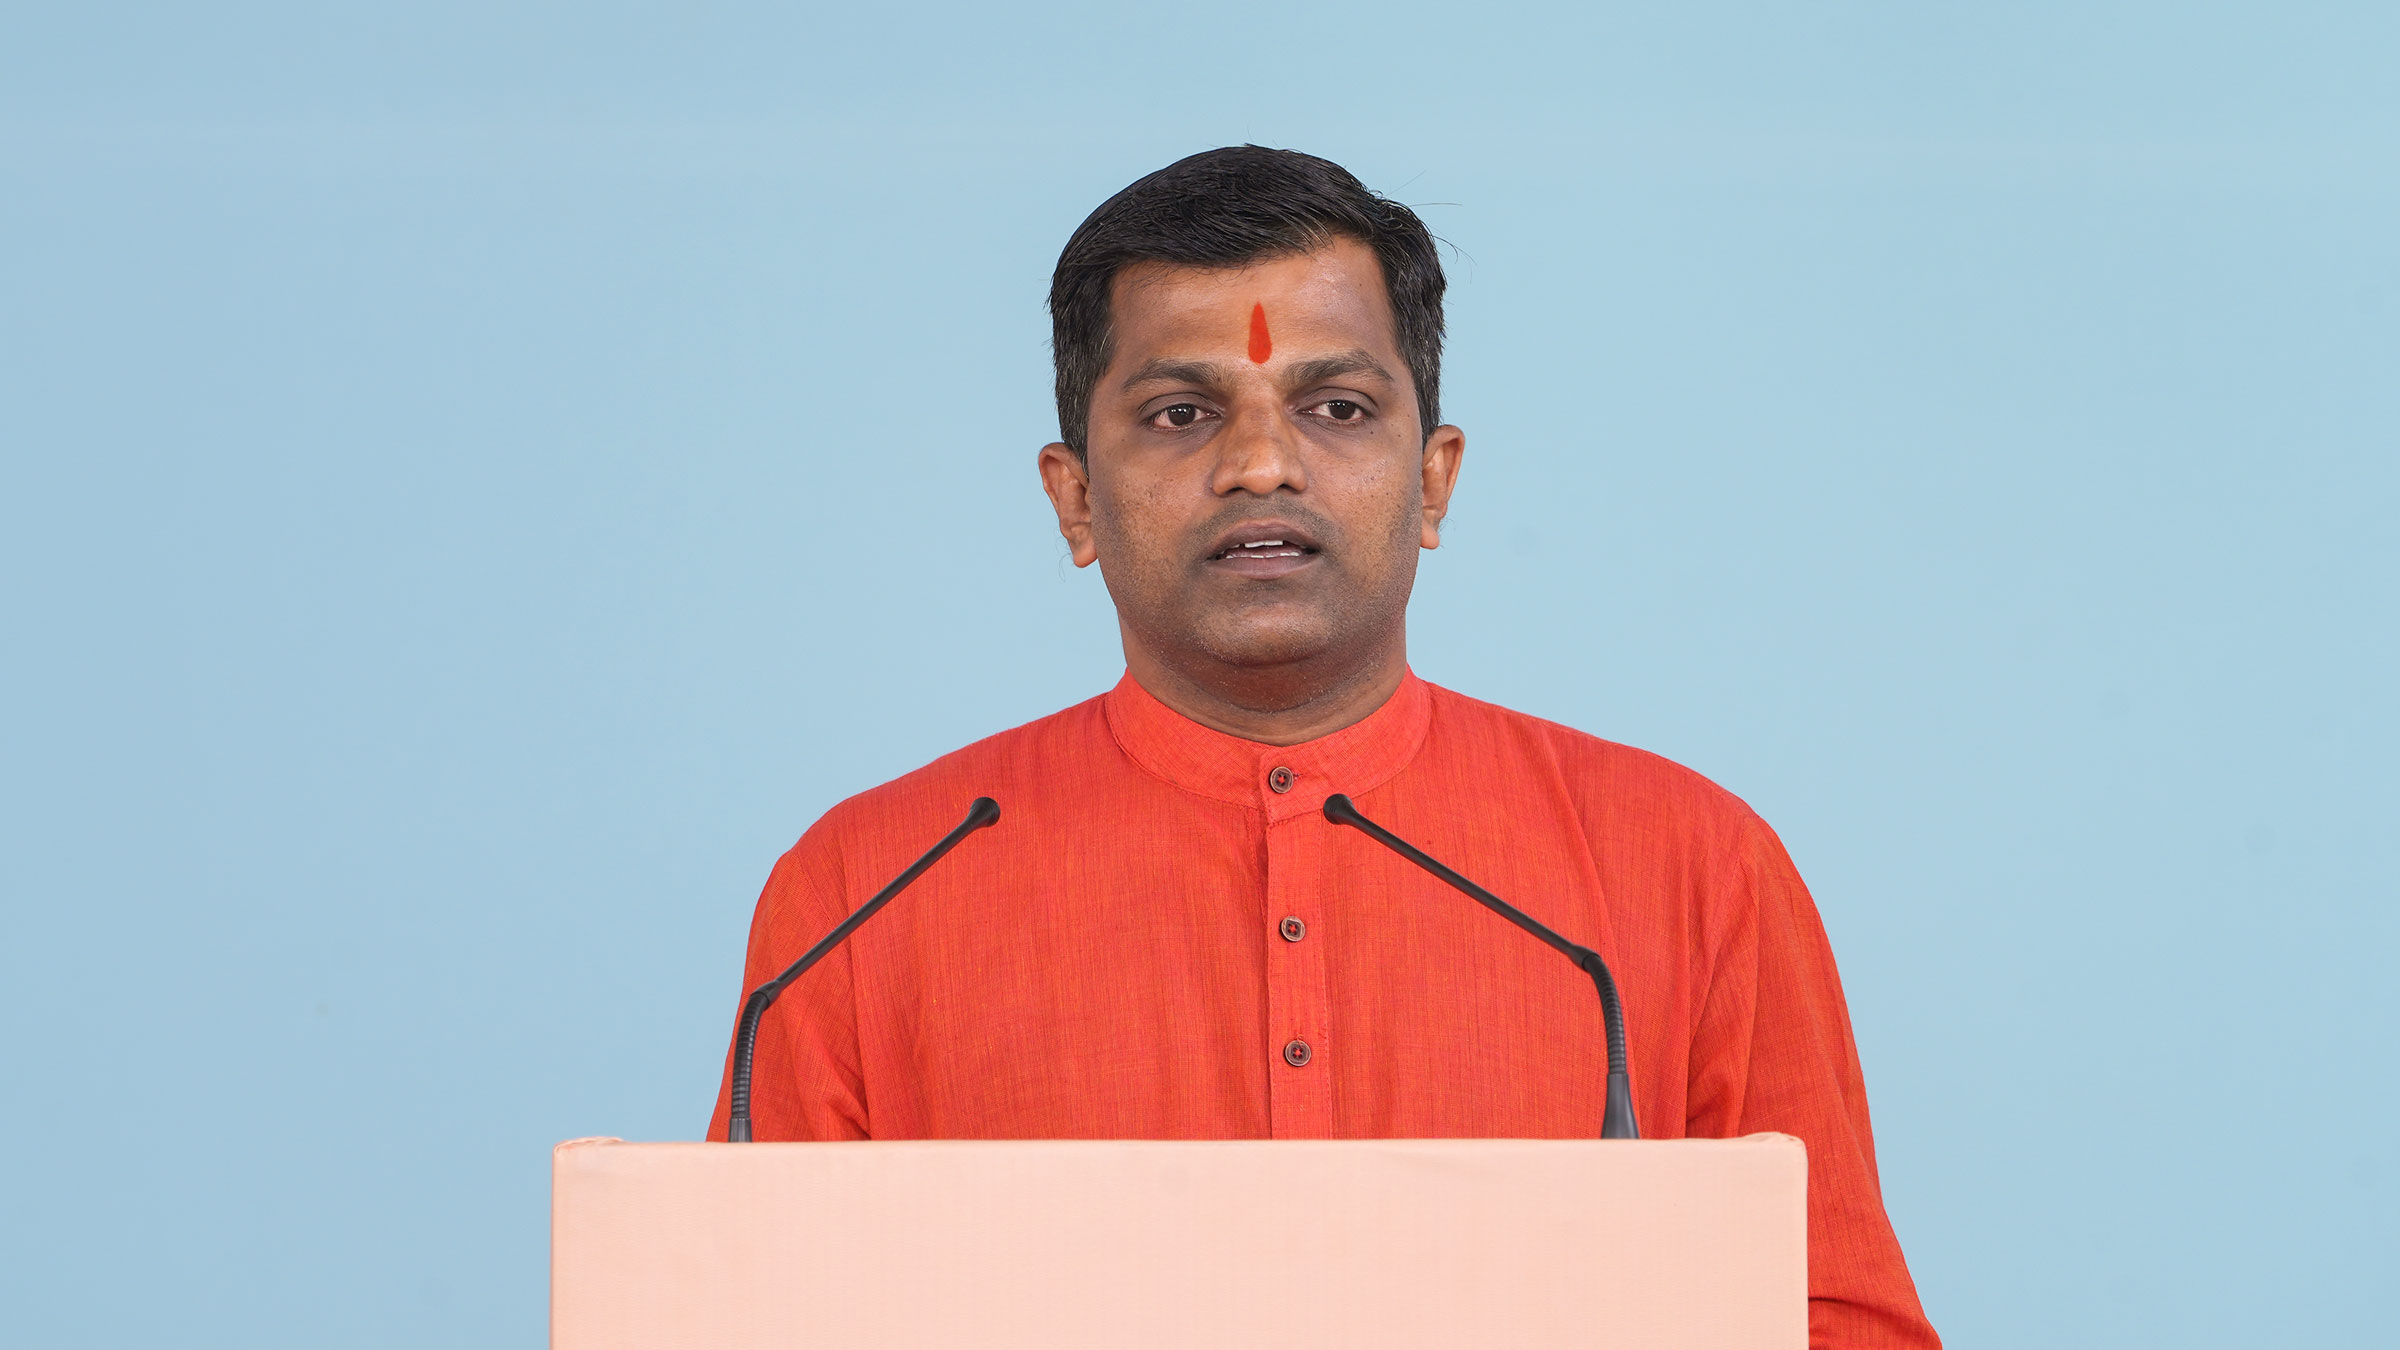 Mr Satyavijay Naik (Coordinator, Hindu Janajagruti Samiti, Goa) narrating an anti-Hindu incident that took place in Calangute, Goa, which hurt the religious sentiments of Hindus. He also spoke about the united opposition put up by the Devout Hindus and the success they achieved.